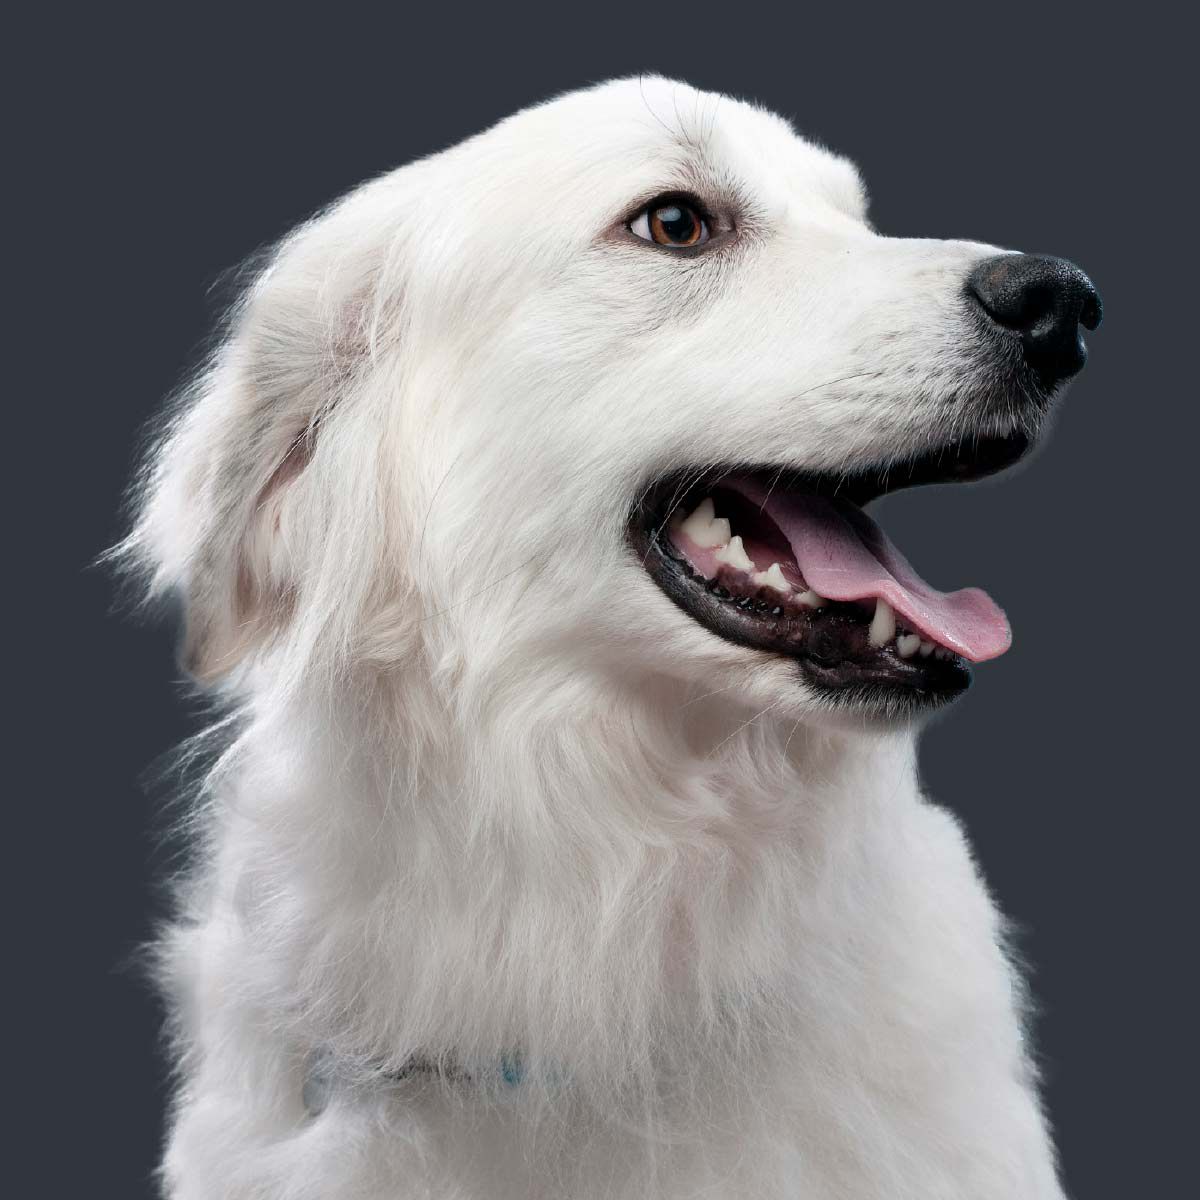 White fluffy dog with tongue out on charcoal background.